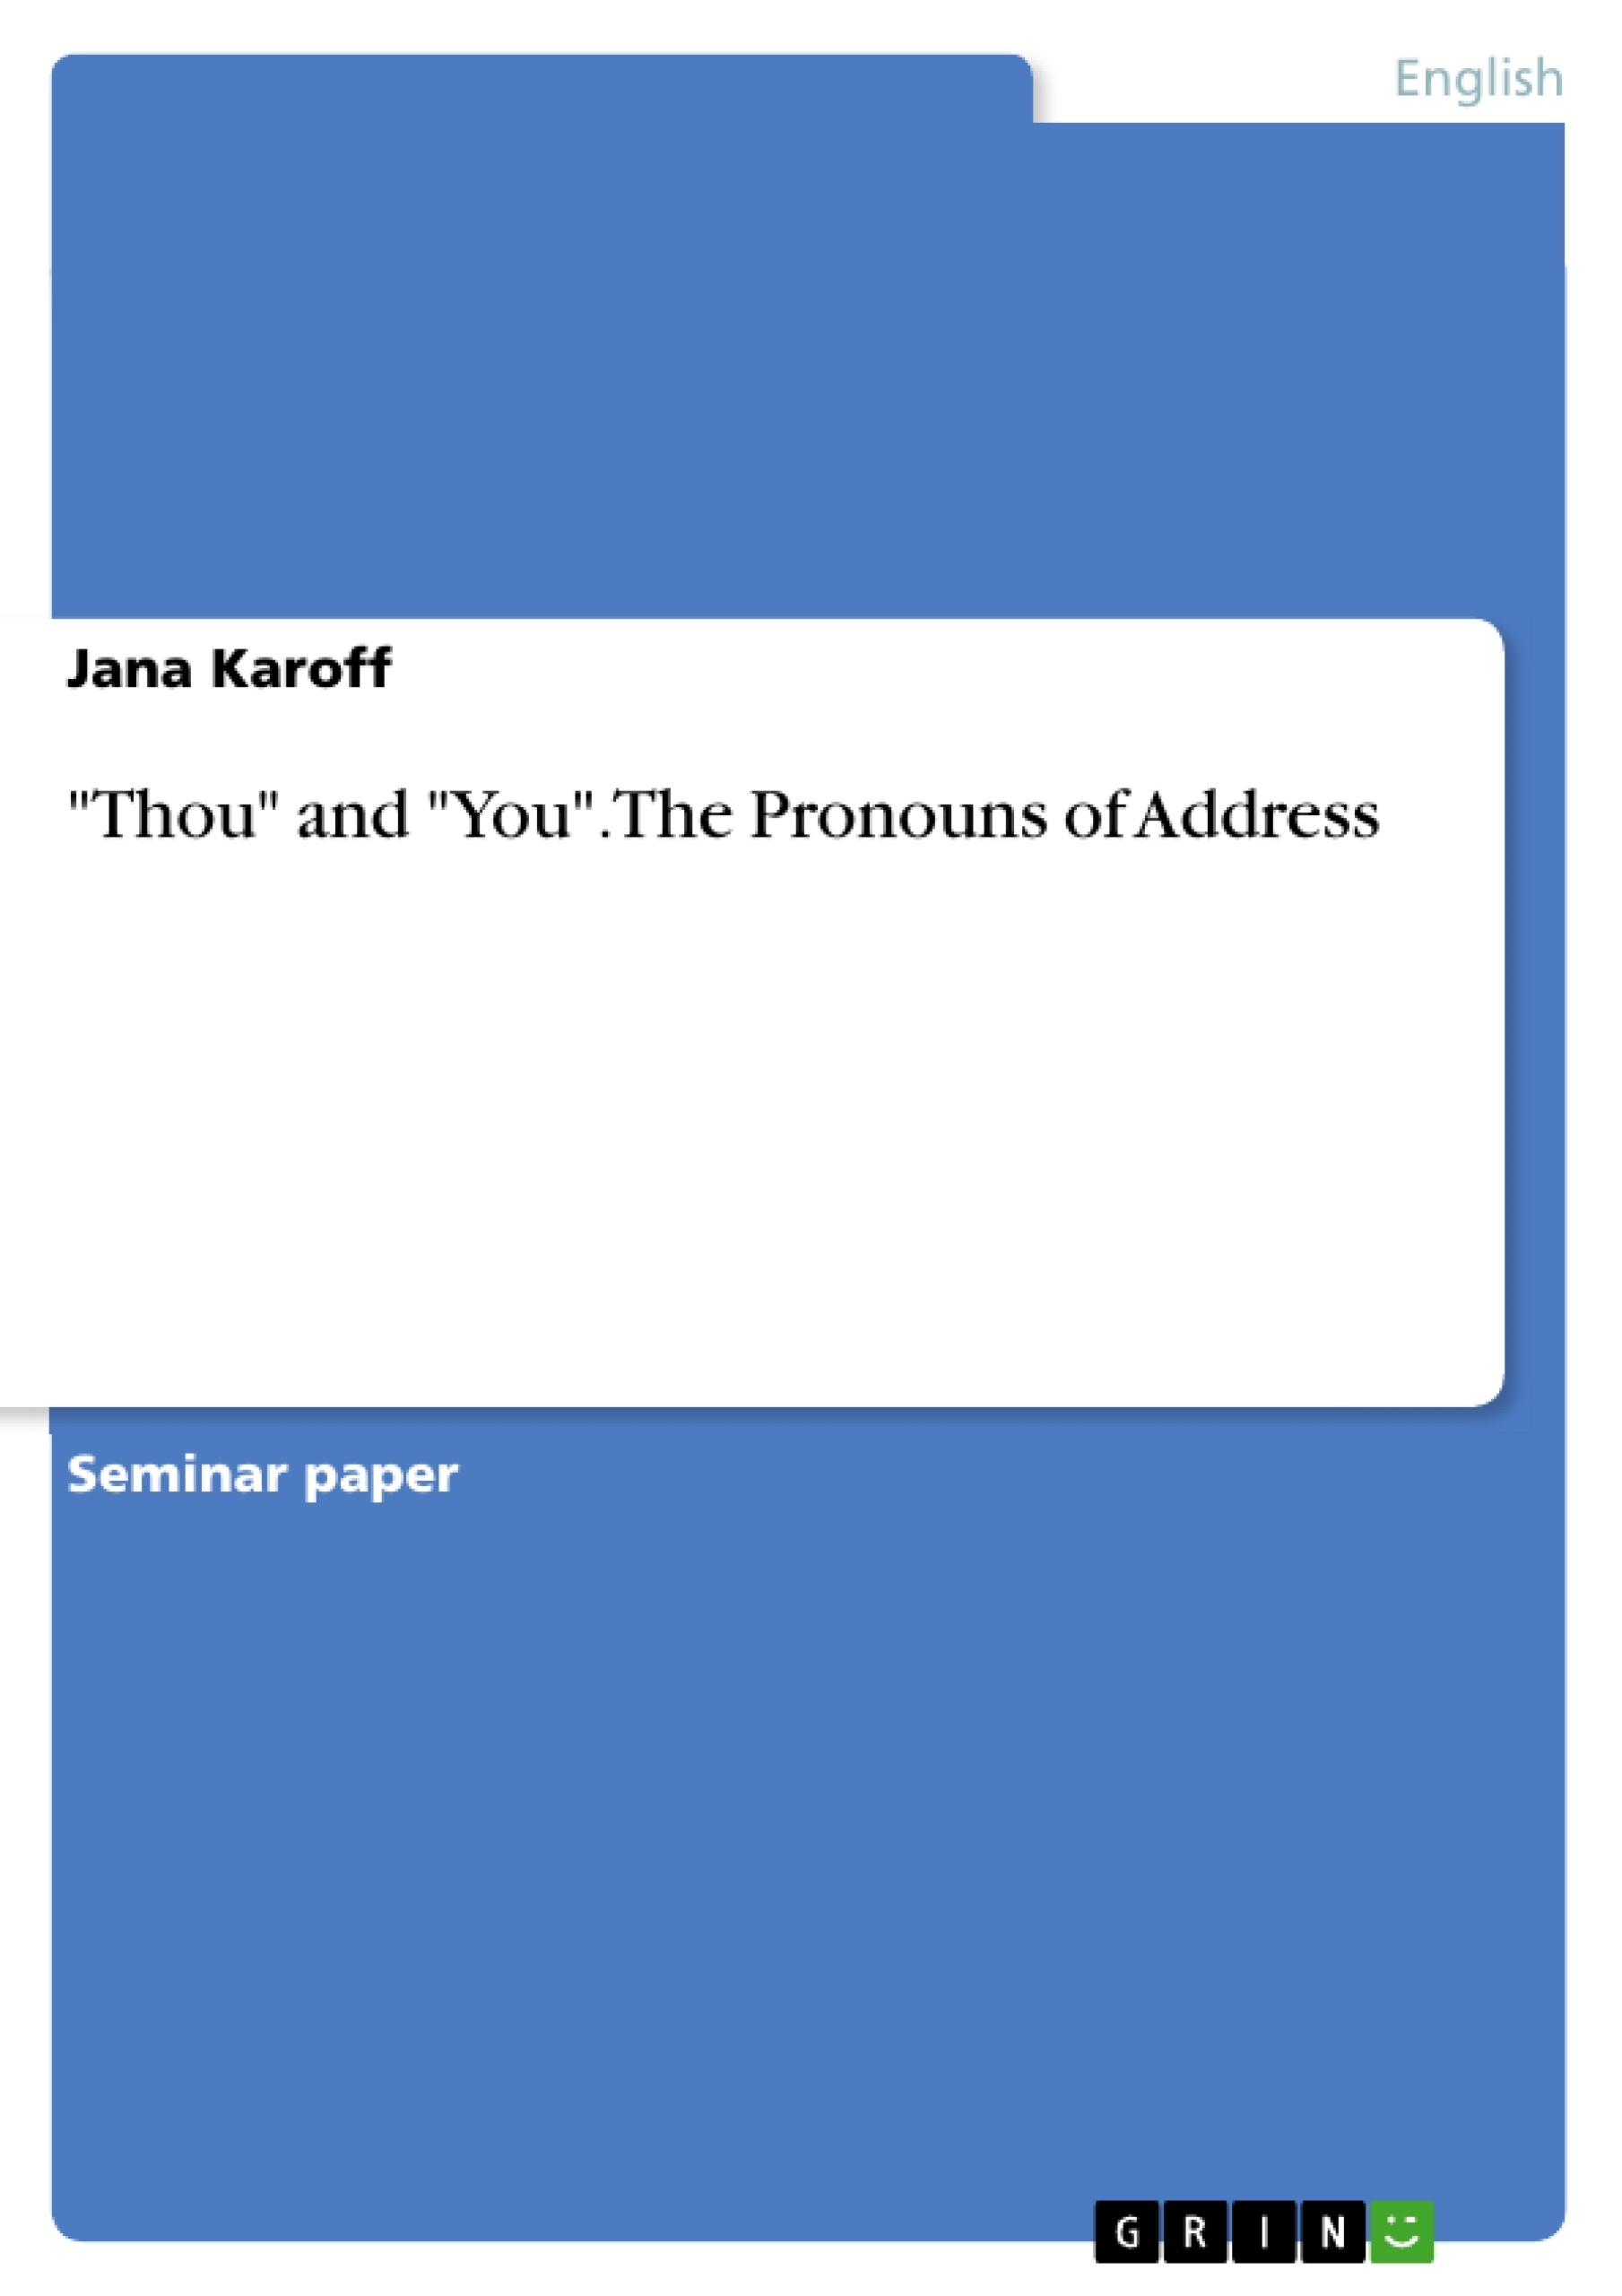 Título: "Thou" and "You". The Pronouns of Address